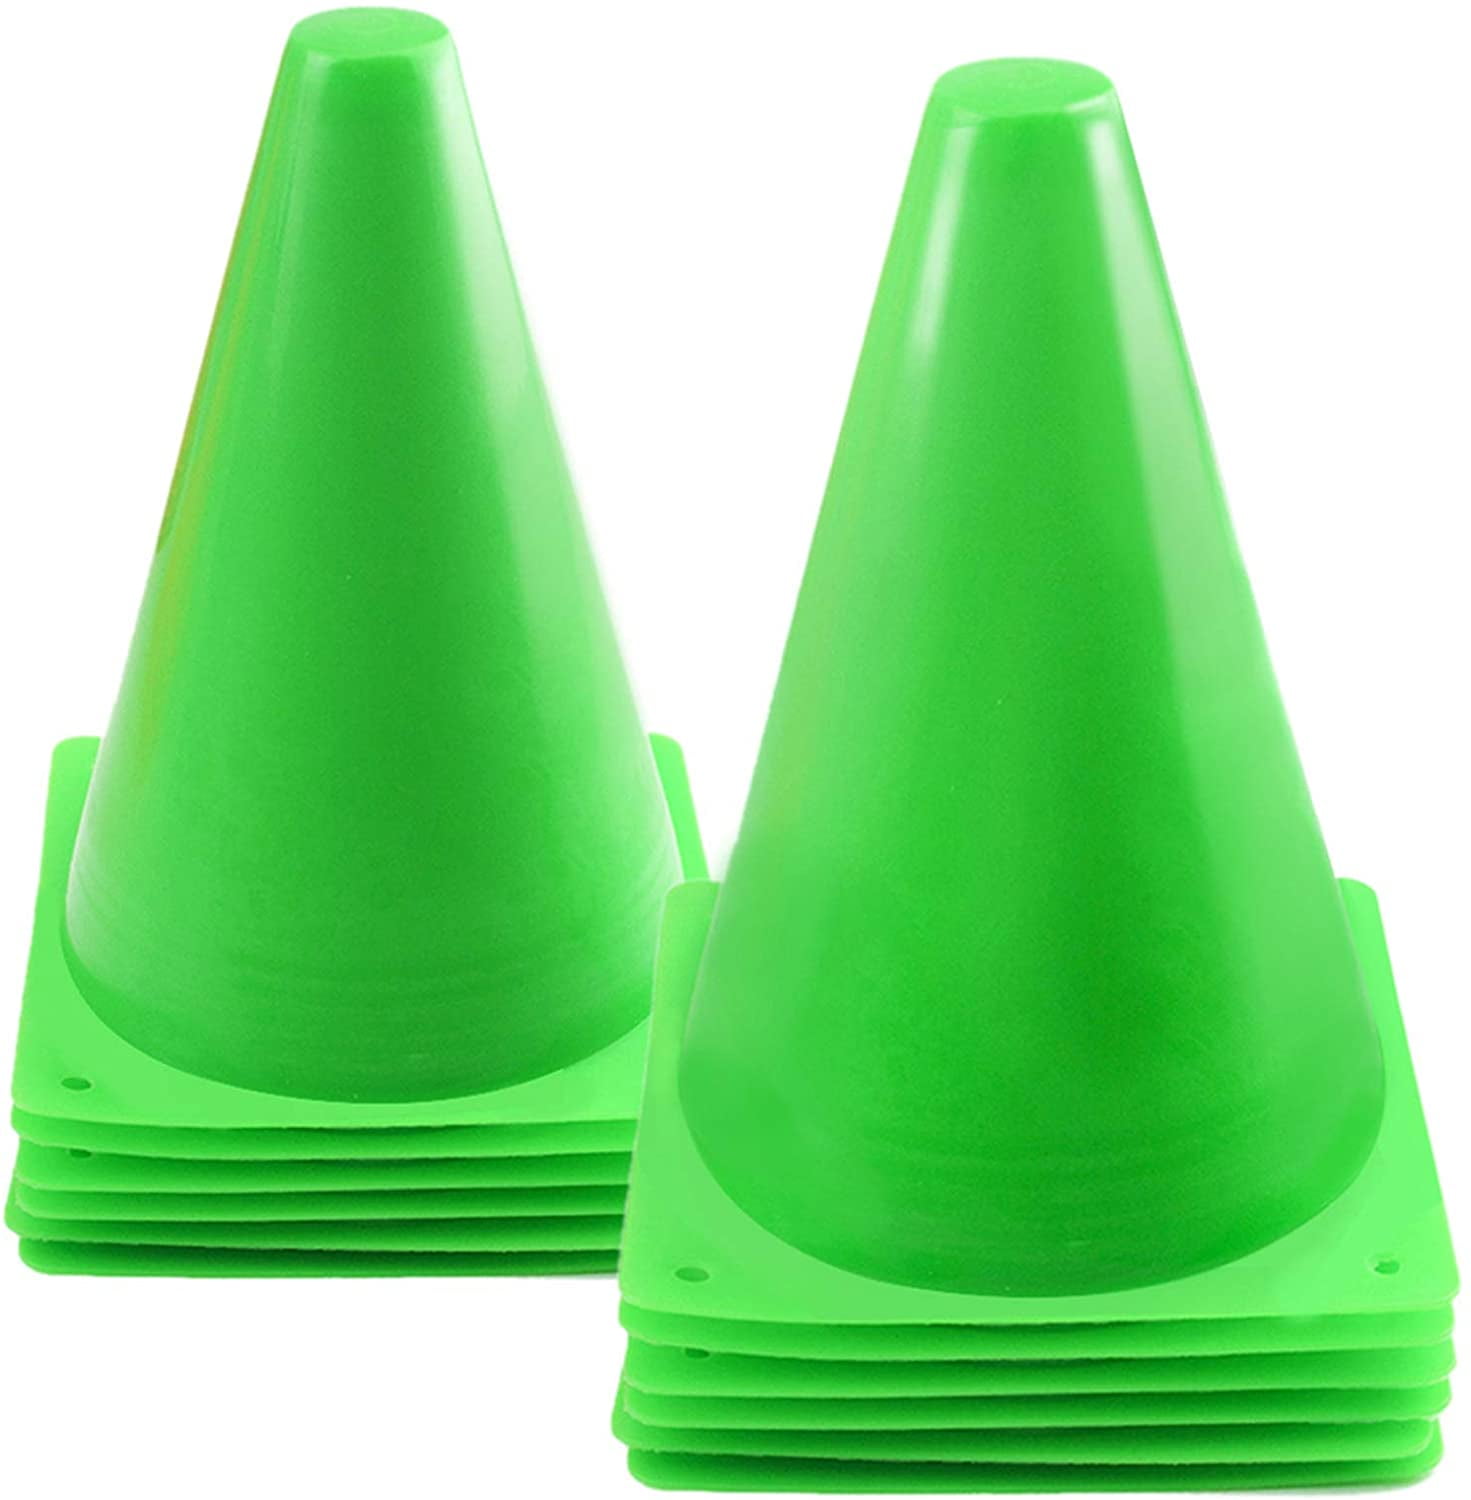 Football Field Marker Cones KINJOEK 7 Inches Sports Training Cones Drill Training 4 Colors Set of 12 or 20 Traffic Cones with Rounded Edges for Safety Basketball Coaching Soccer Agility 